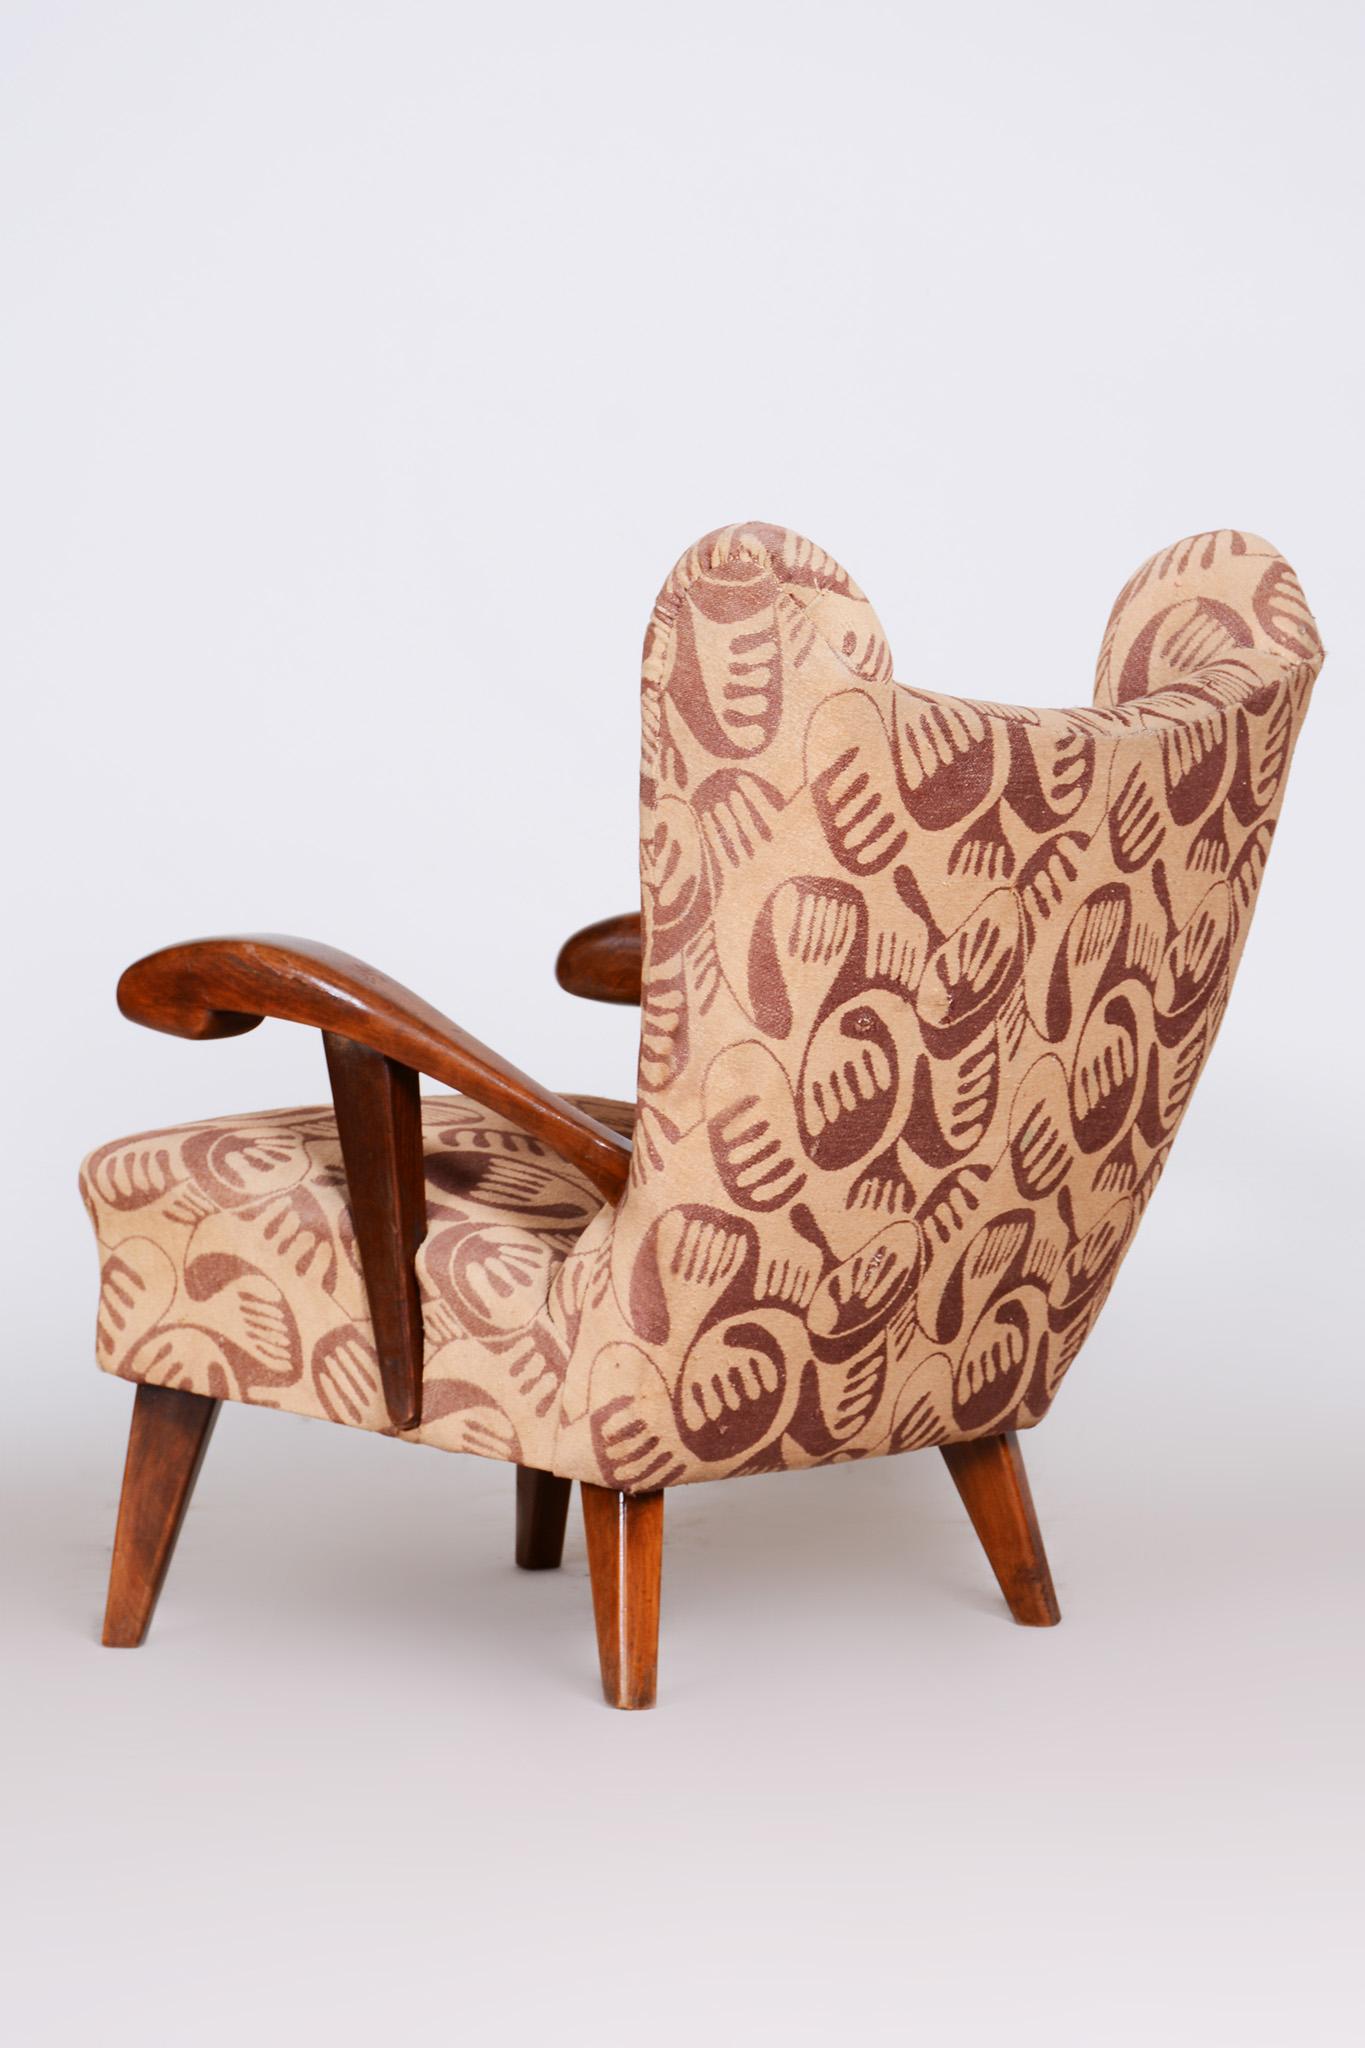 Brown Art Deco Armchair, Made in 1930s Czechia For Sale 5